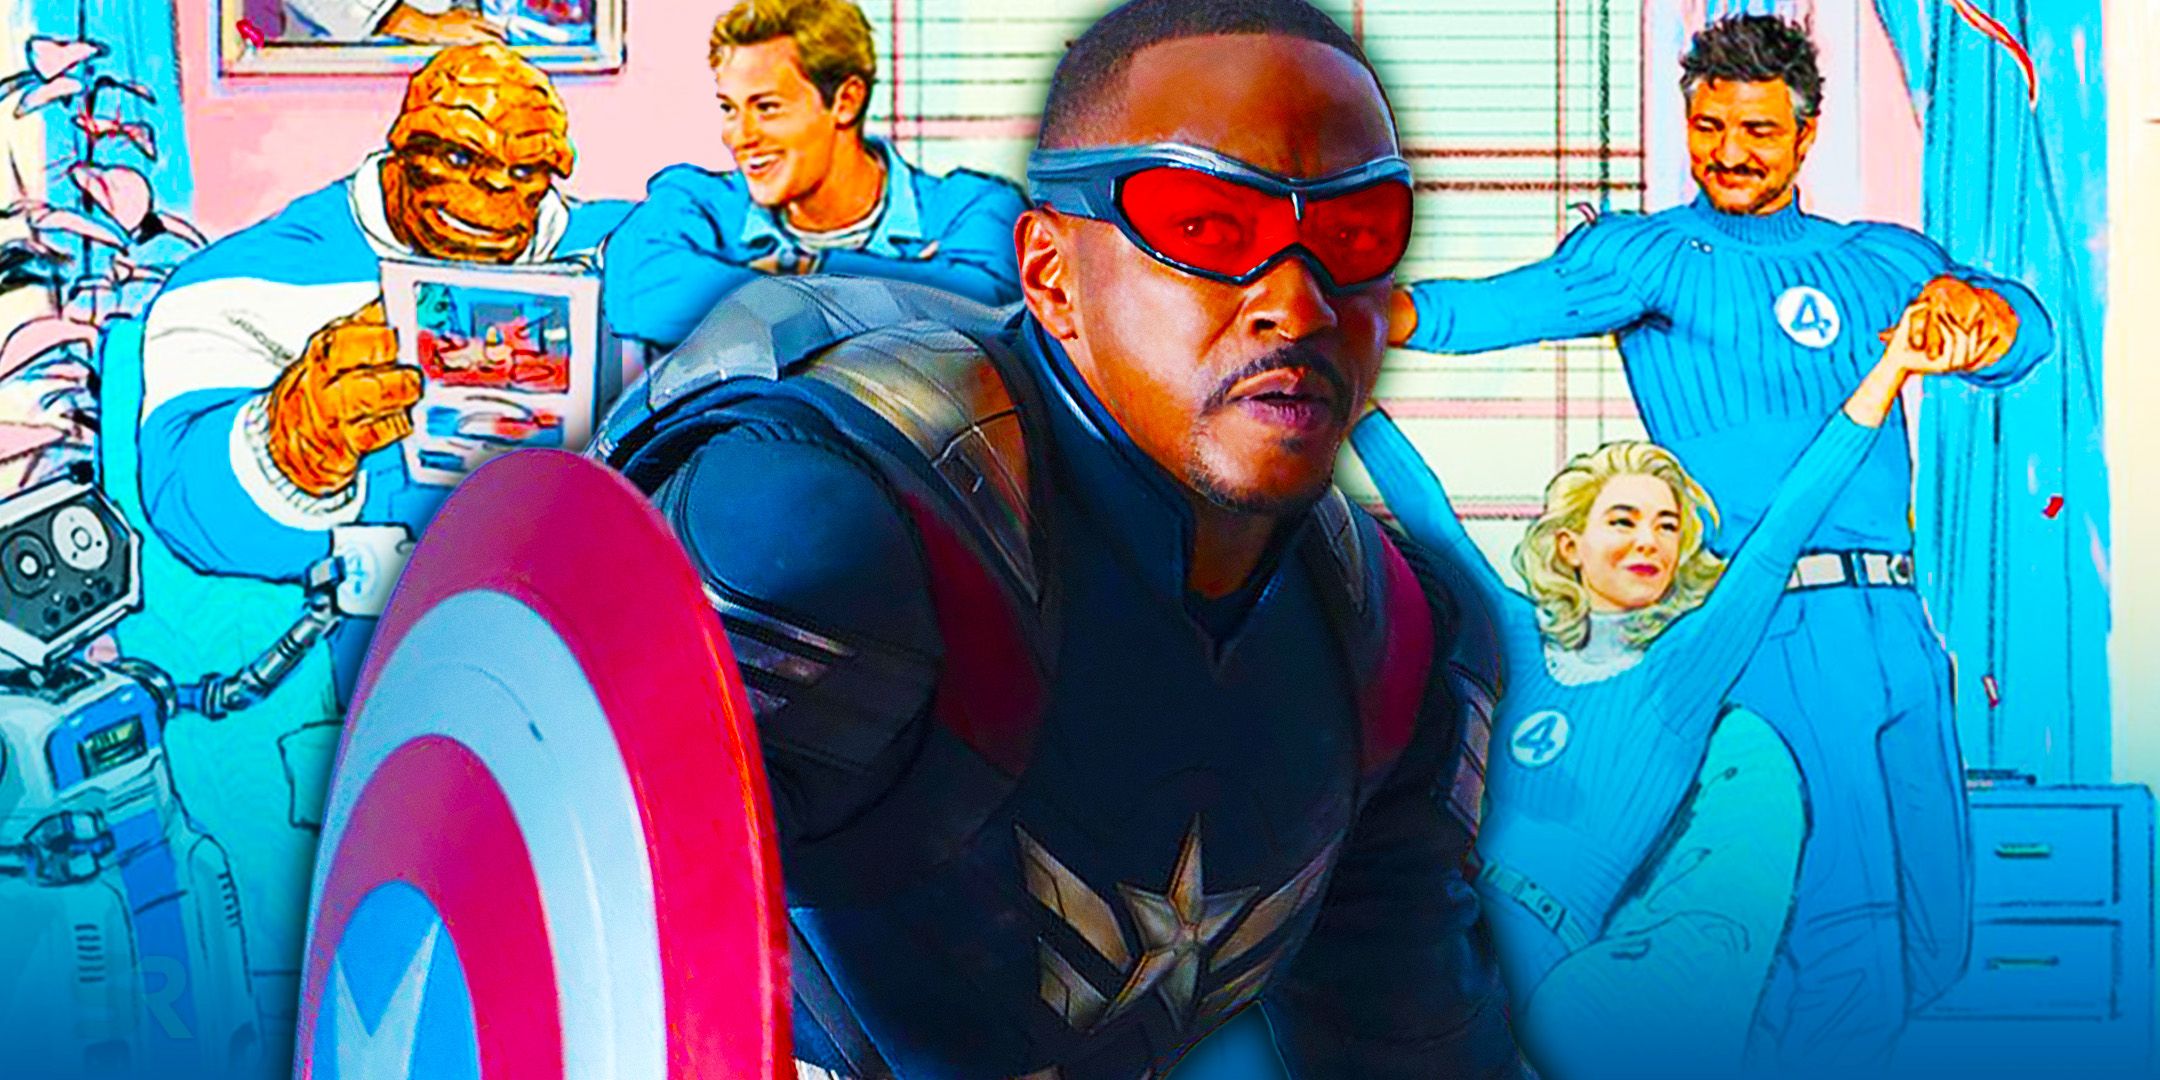 Anthony Mackie As Sam Wilson In Full Blue Captain America Costume With The Fantastic Four Official Casting Art